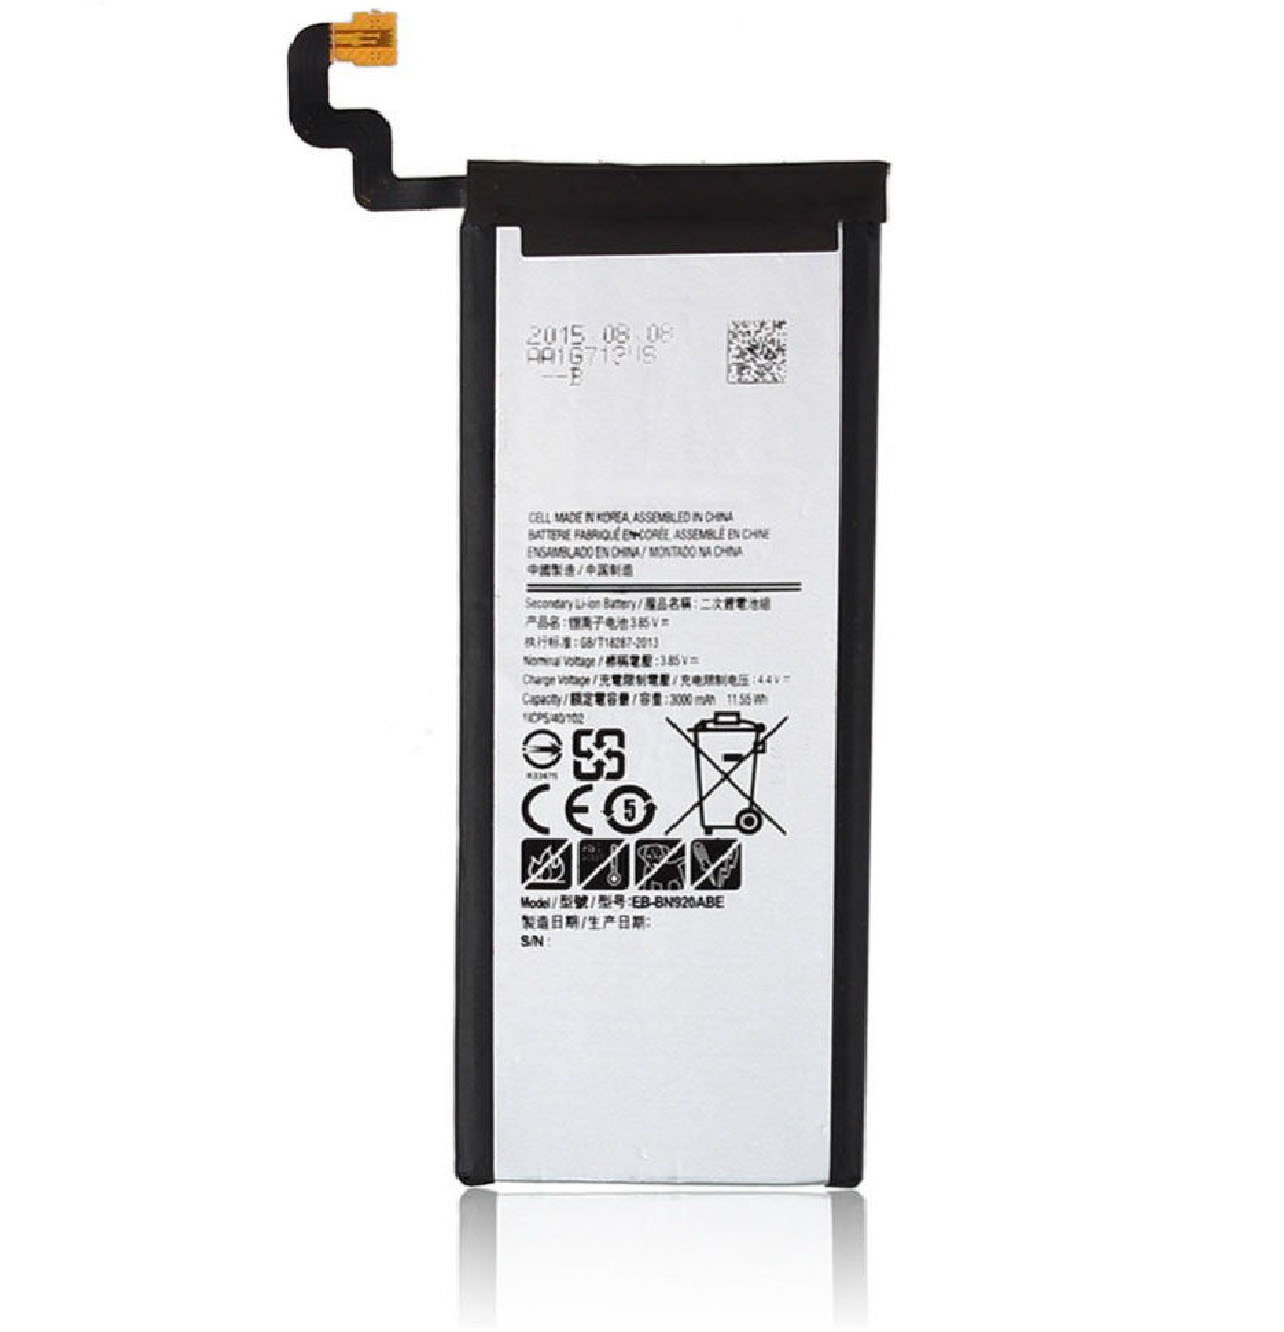 Samsung Note 5 Battery